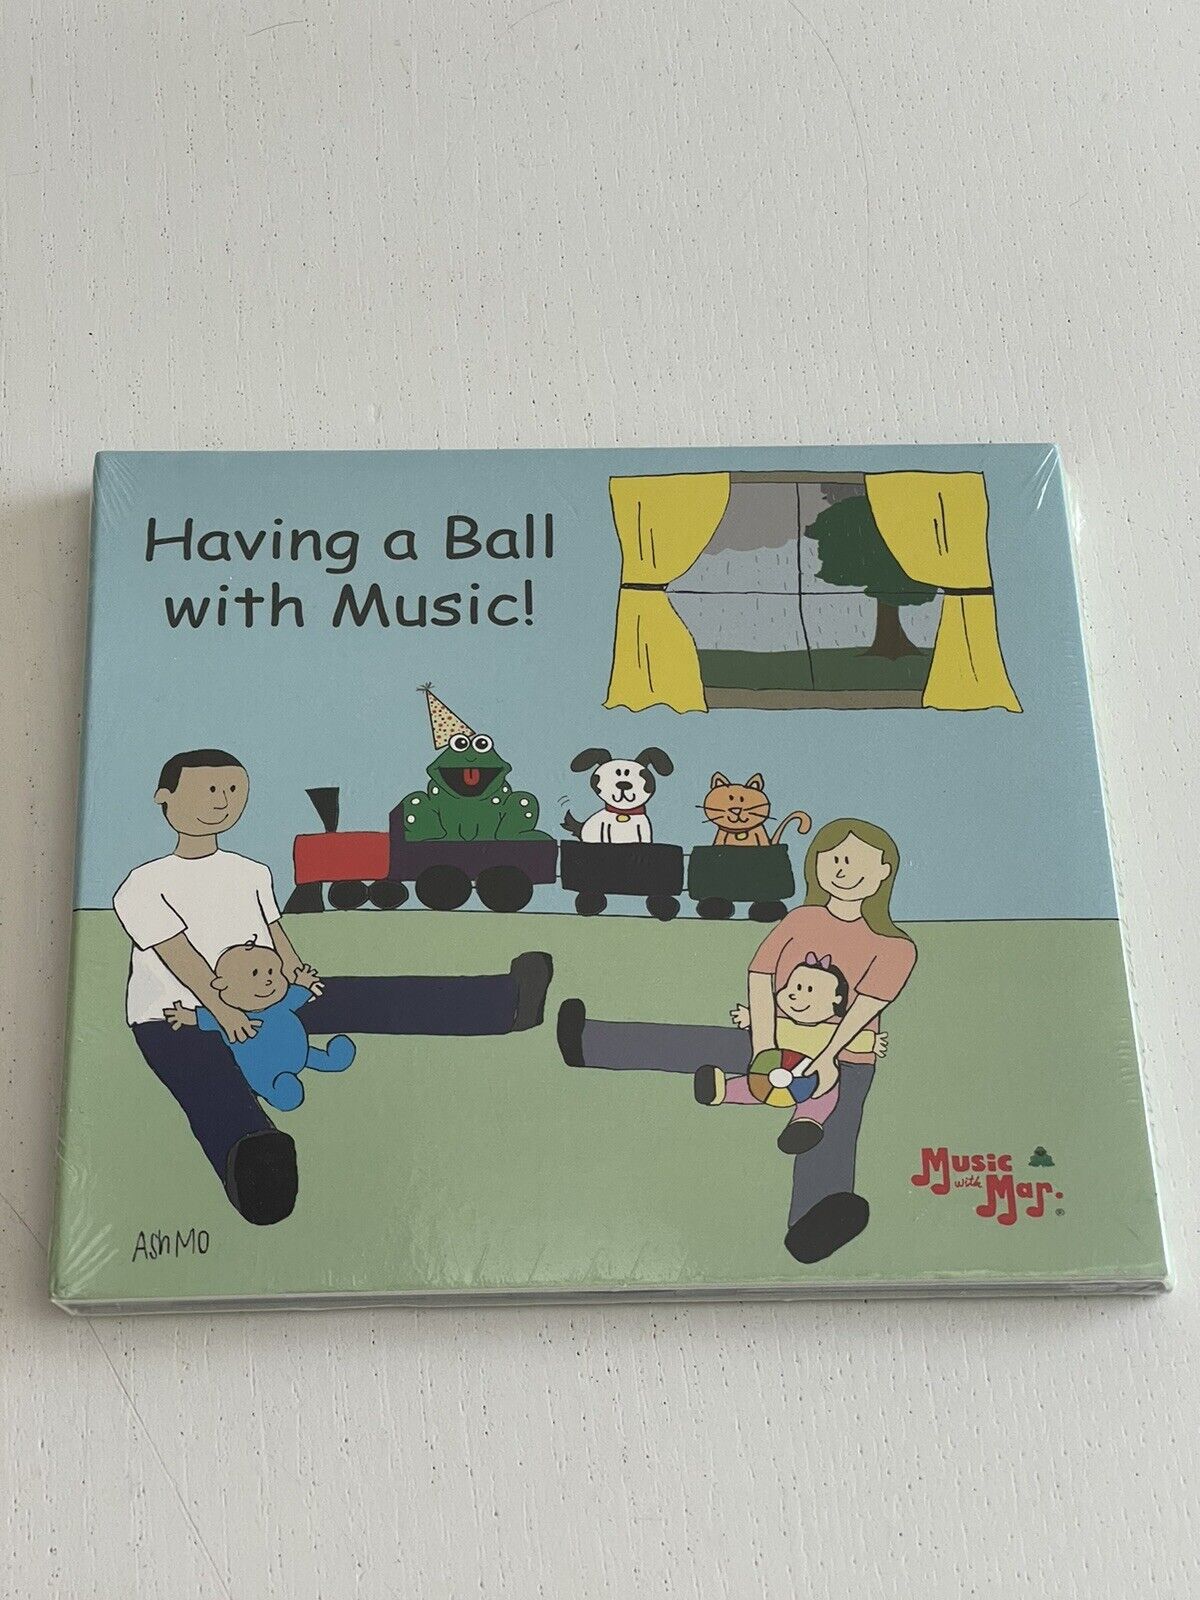 Having a Ball with Music by Music with Mar. (CD, 2013)